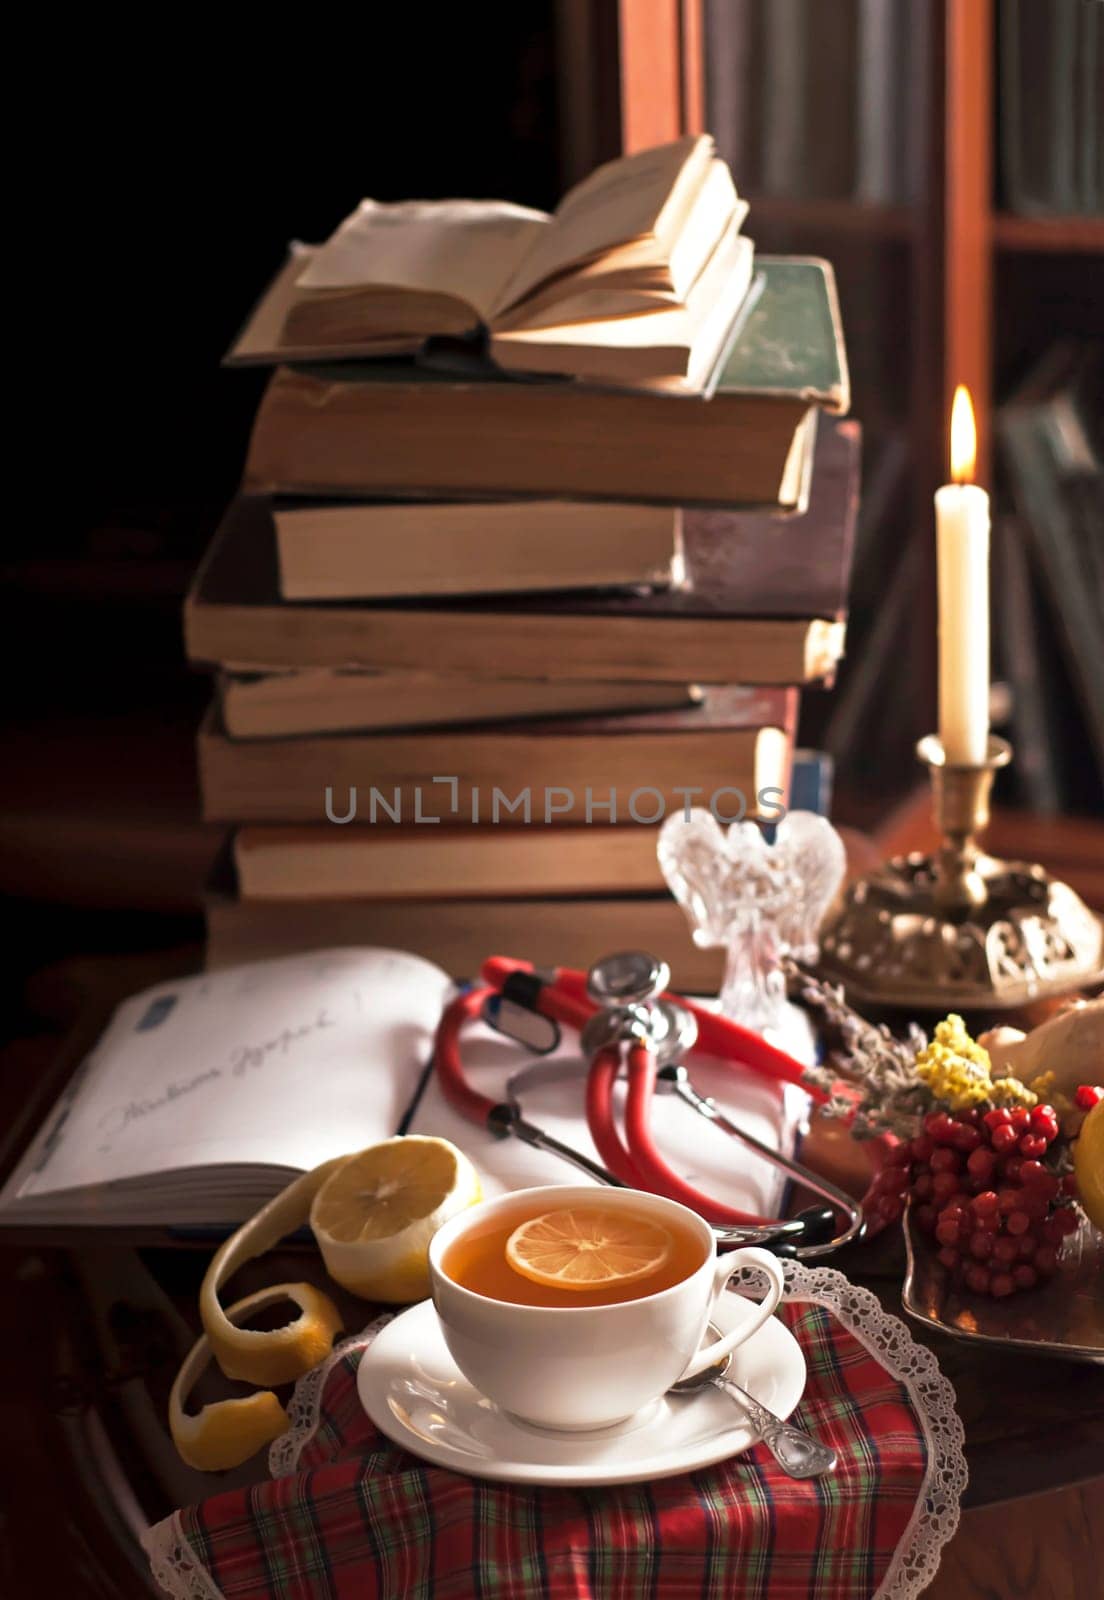 medical still life. A stack of vintage books, a phonendoscope, a cup of tea with lemon, an open notepad, medicinal plants on a wooden table by aprilphoto